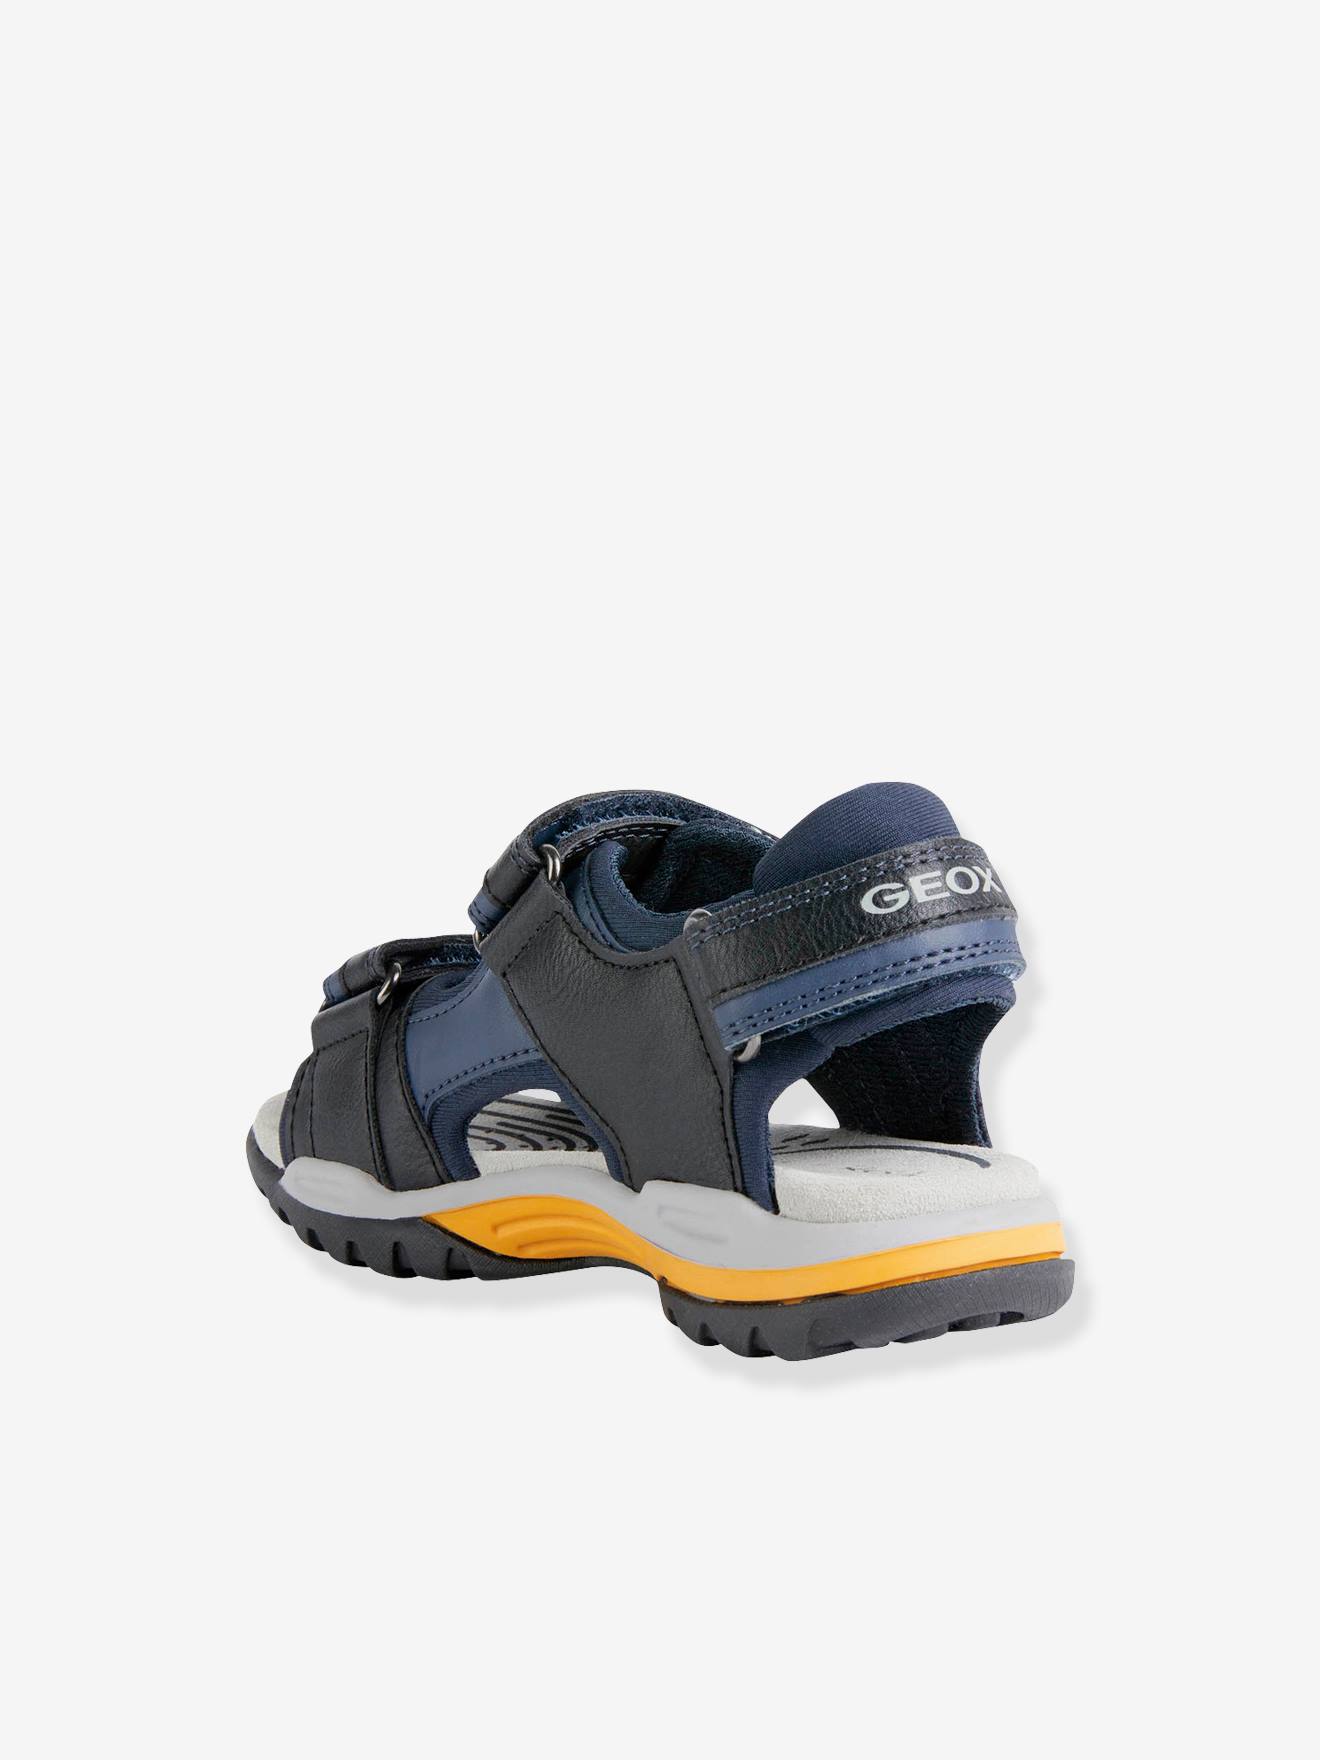 Sandals for Boys, J. Borealis medium by solid, GEOX® blue - B.A Shoes